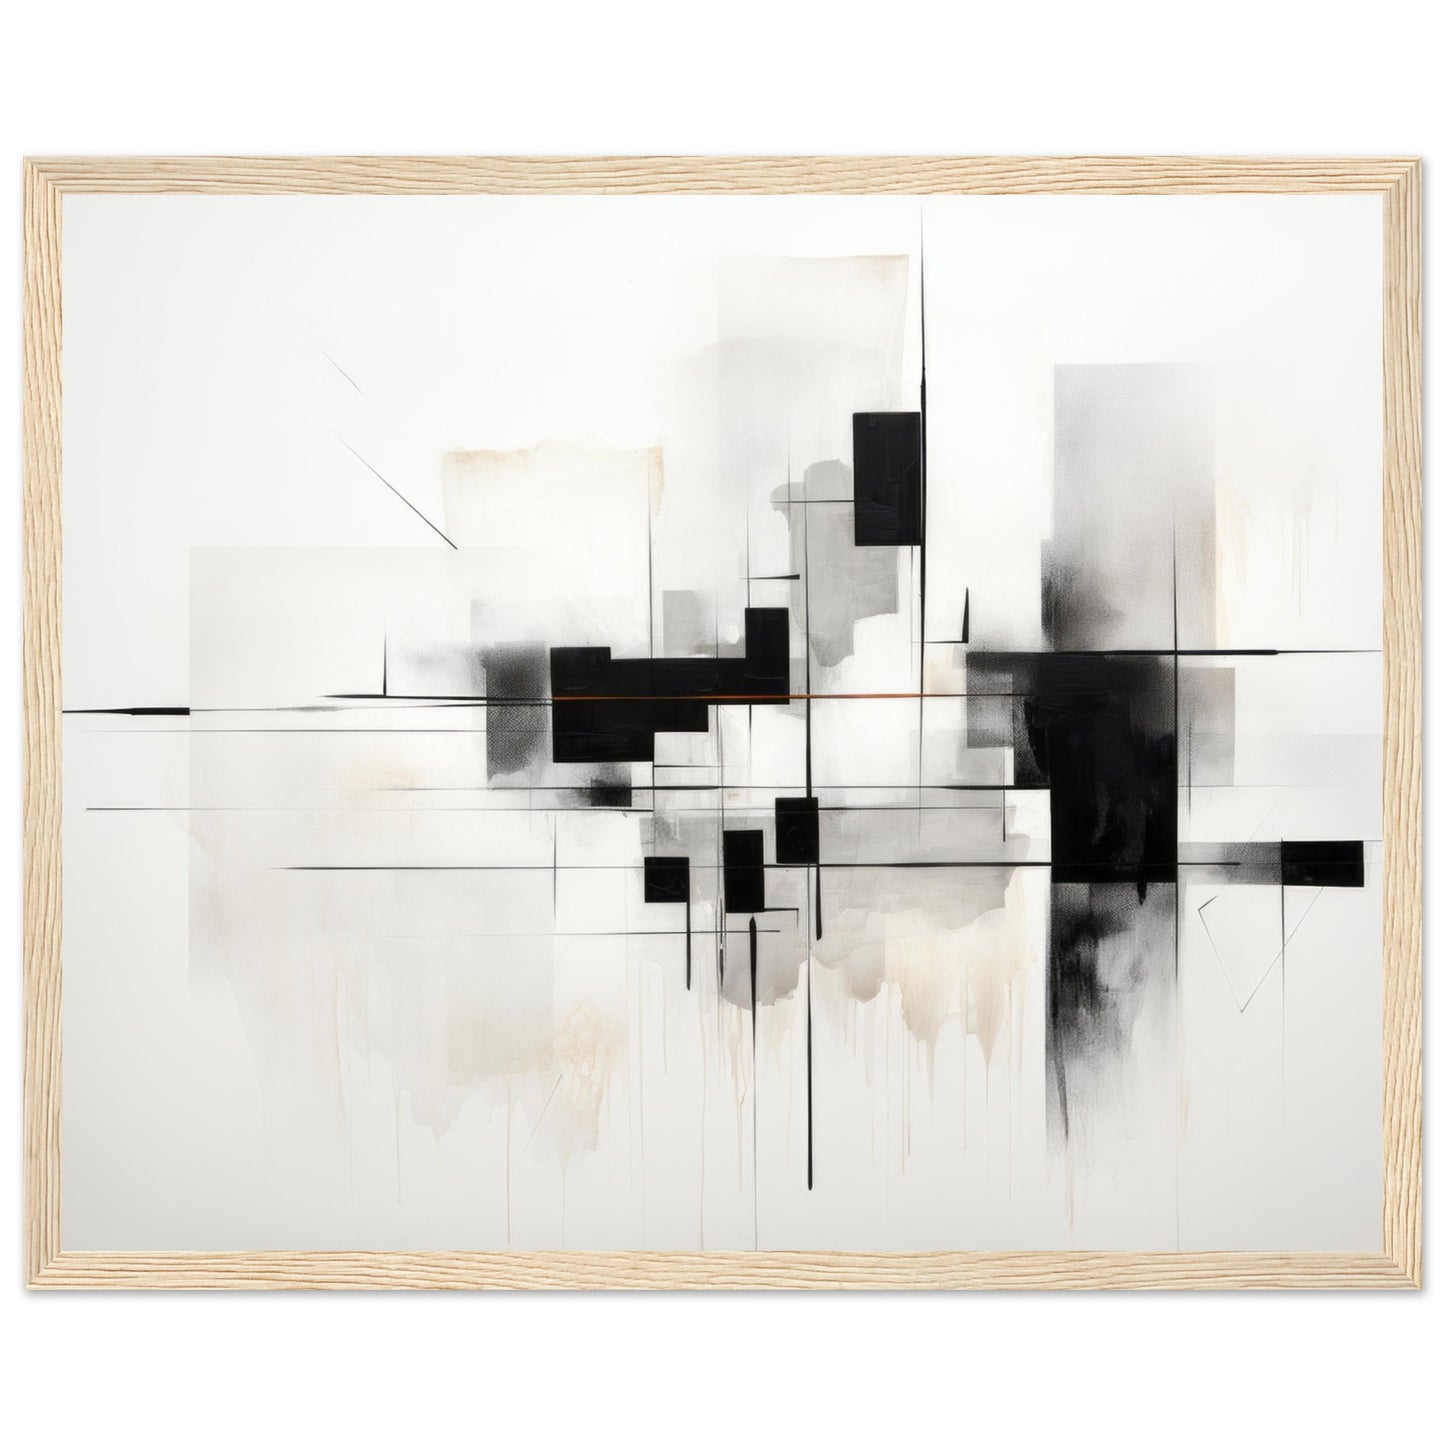 Black Mirror - Black and White Abstract Wall Art